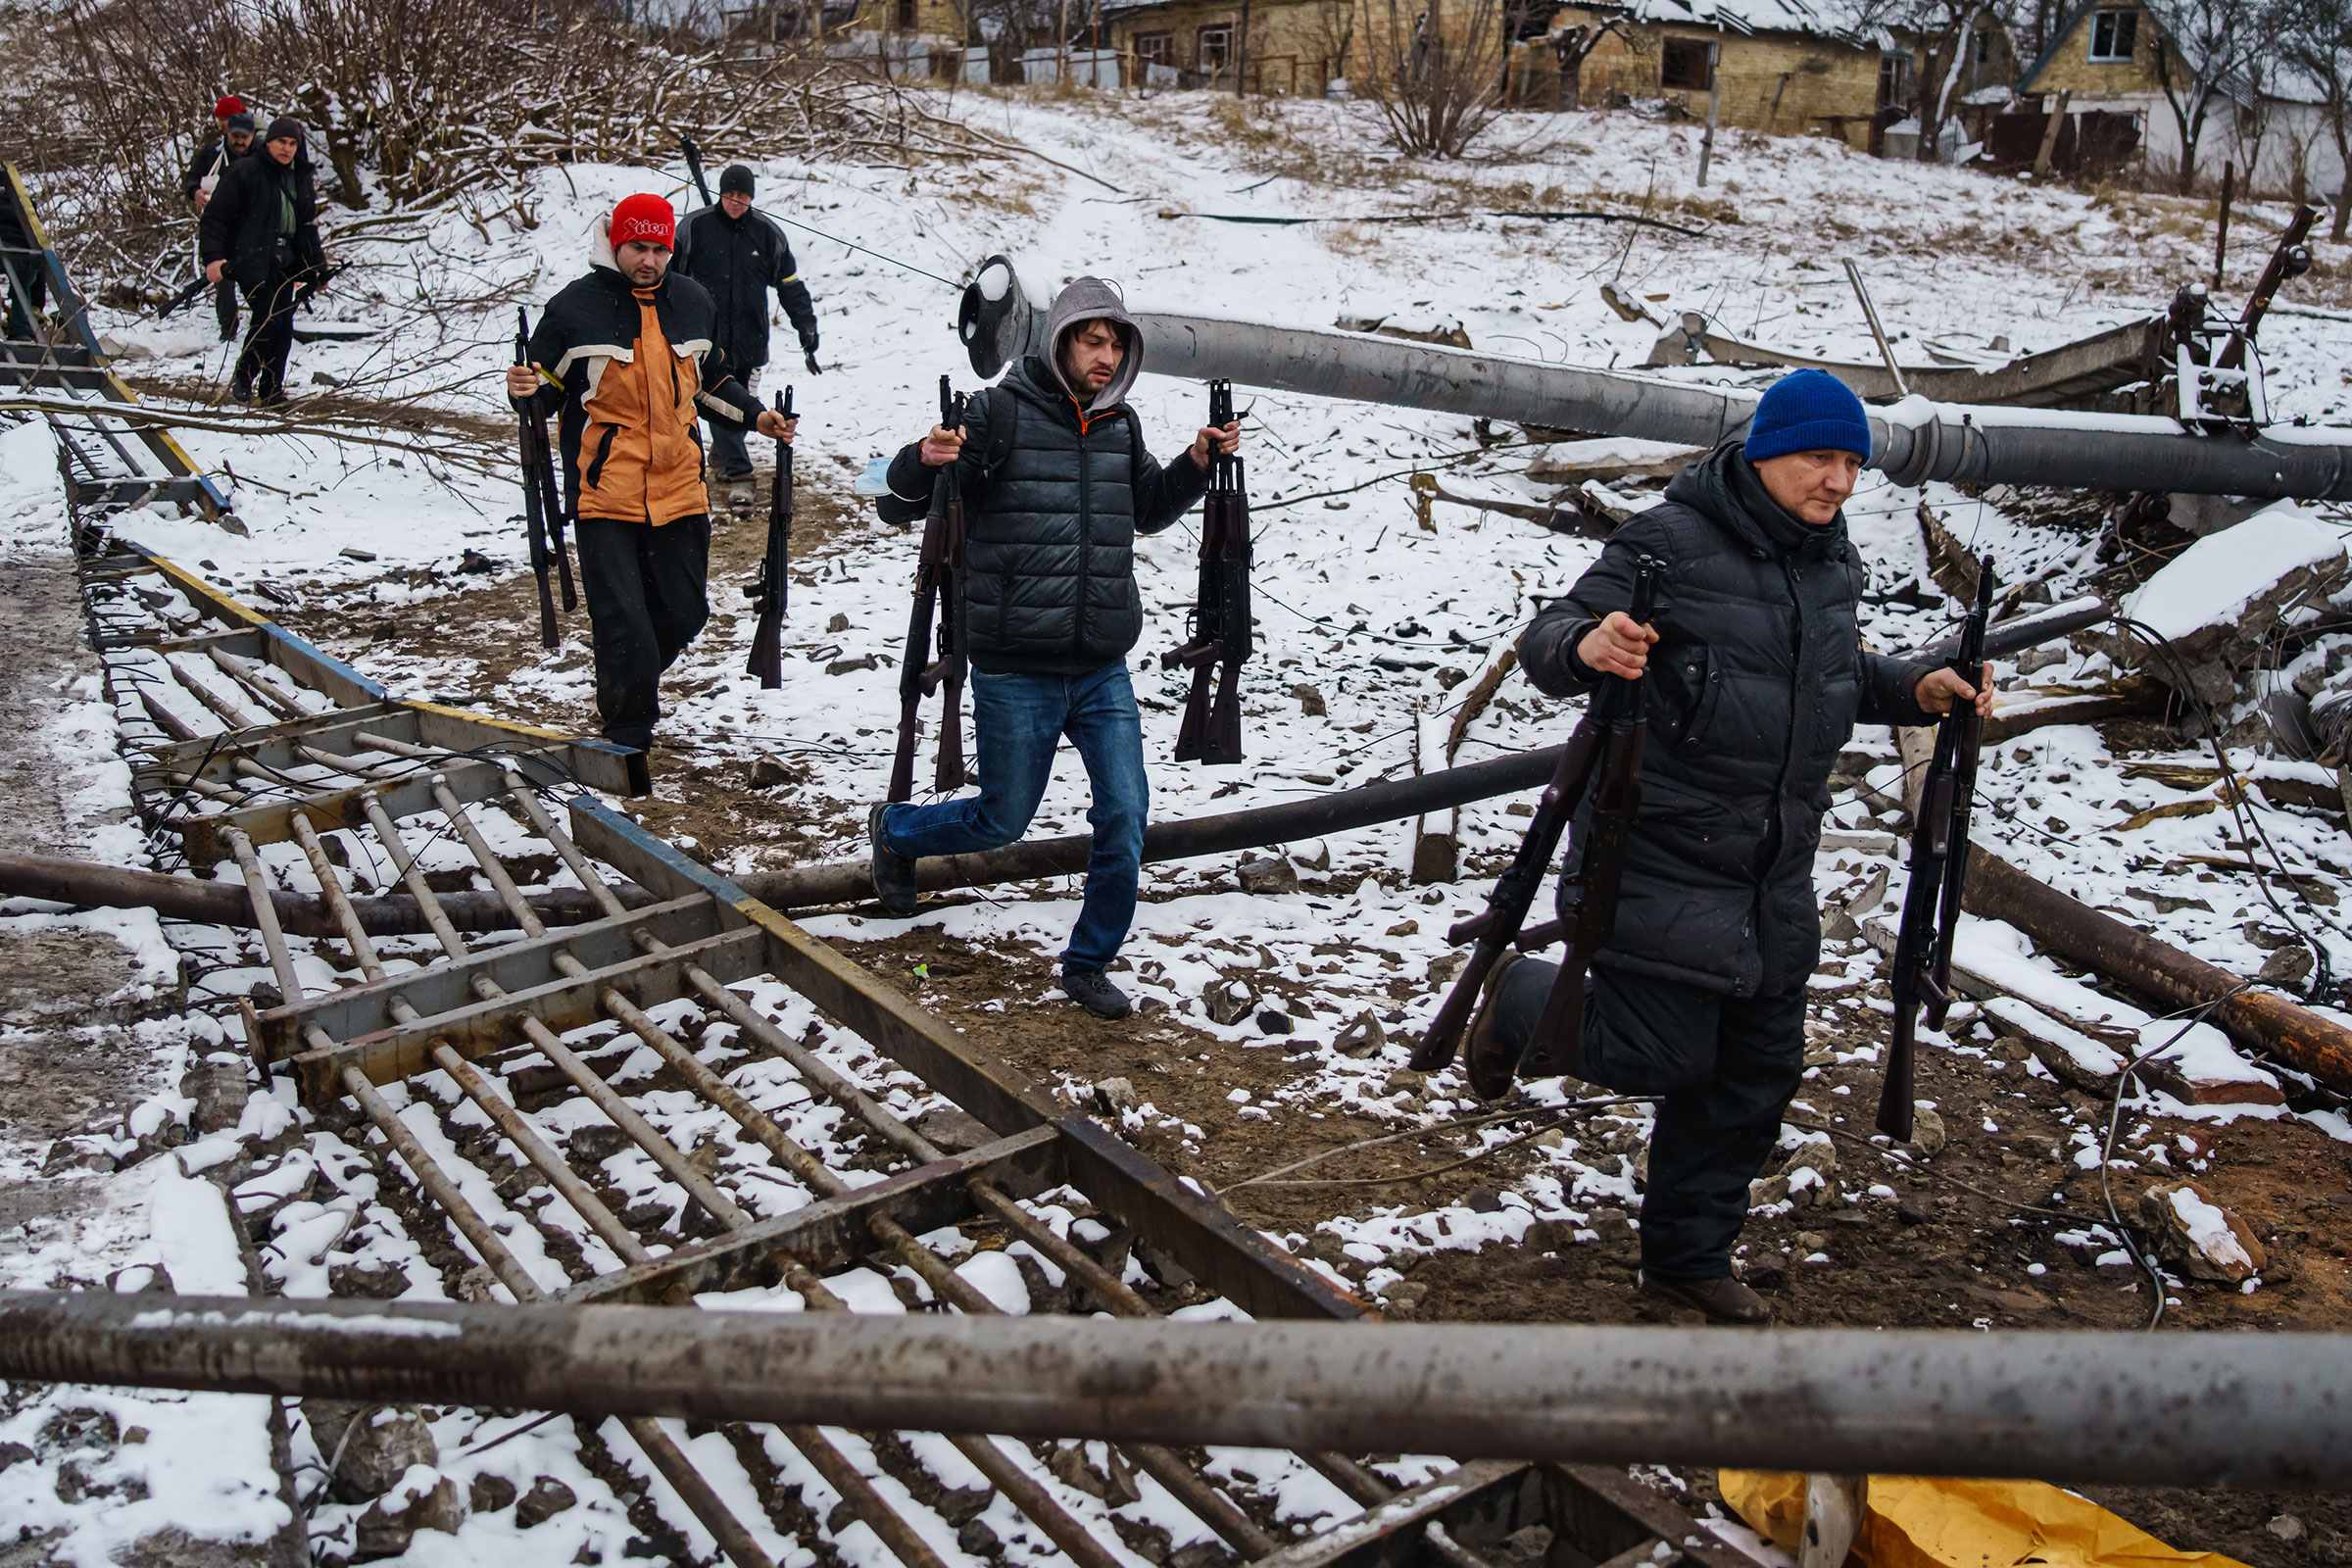 Volunteer fighters transport rifles across a river under a destroyed bridge to reinforce Ukrainian troops in Irpin on March 1. (Marcus Yam—Los Angeles Times/Getty Images)